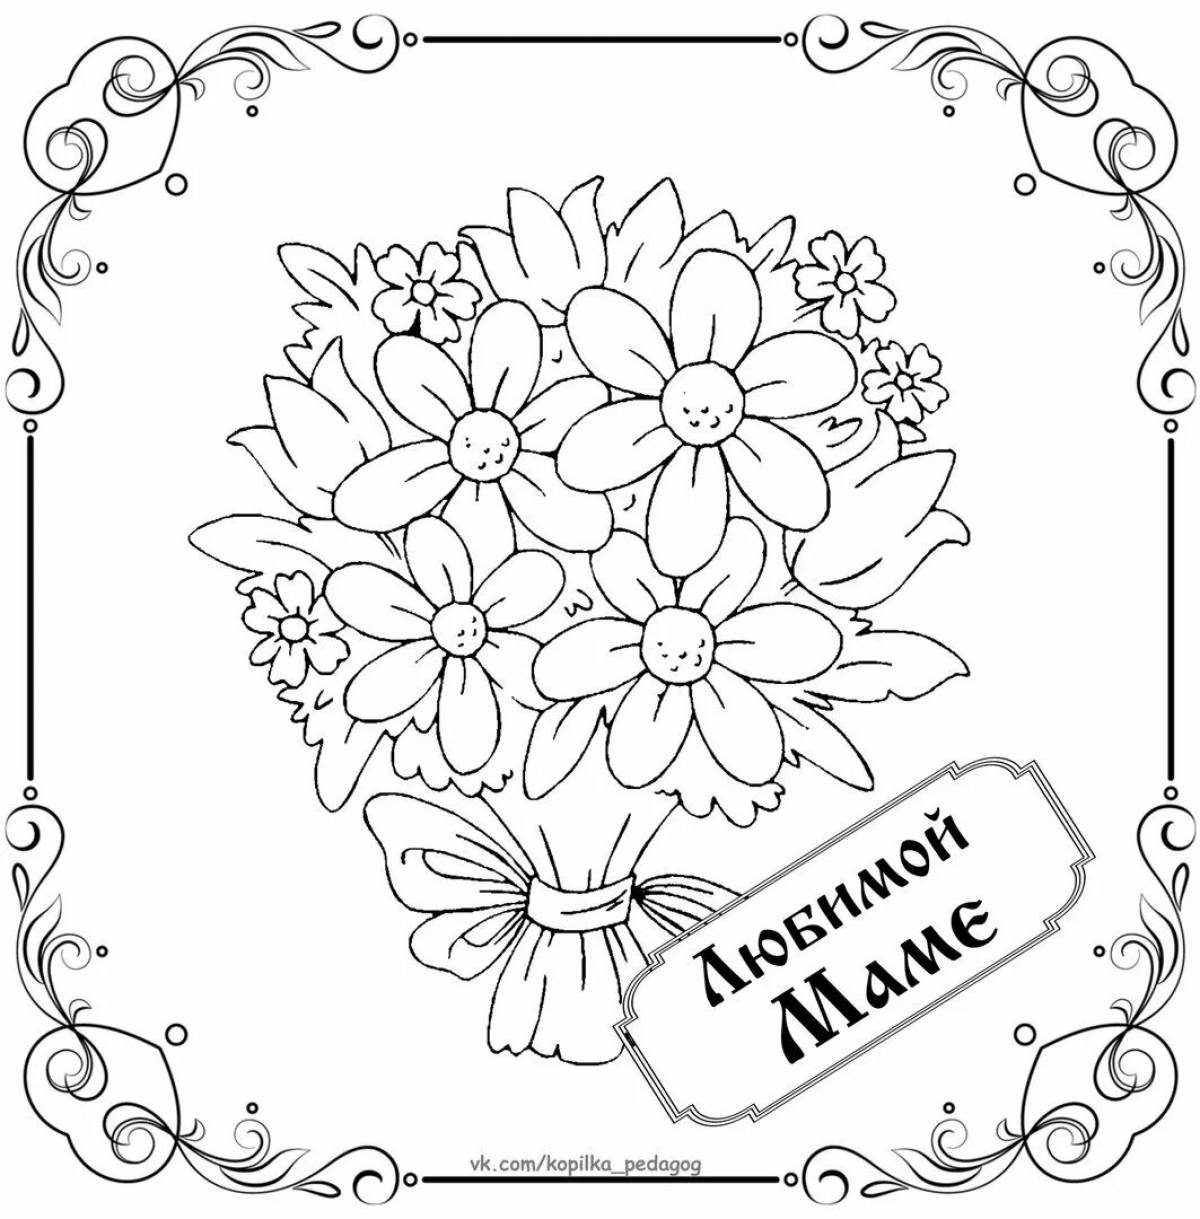 Coloring page charming grandmother